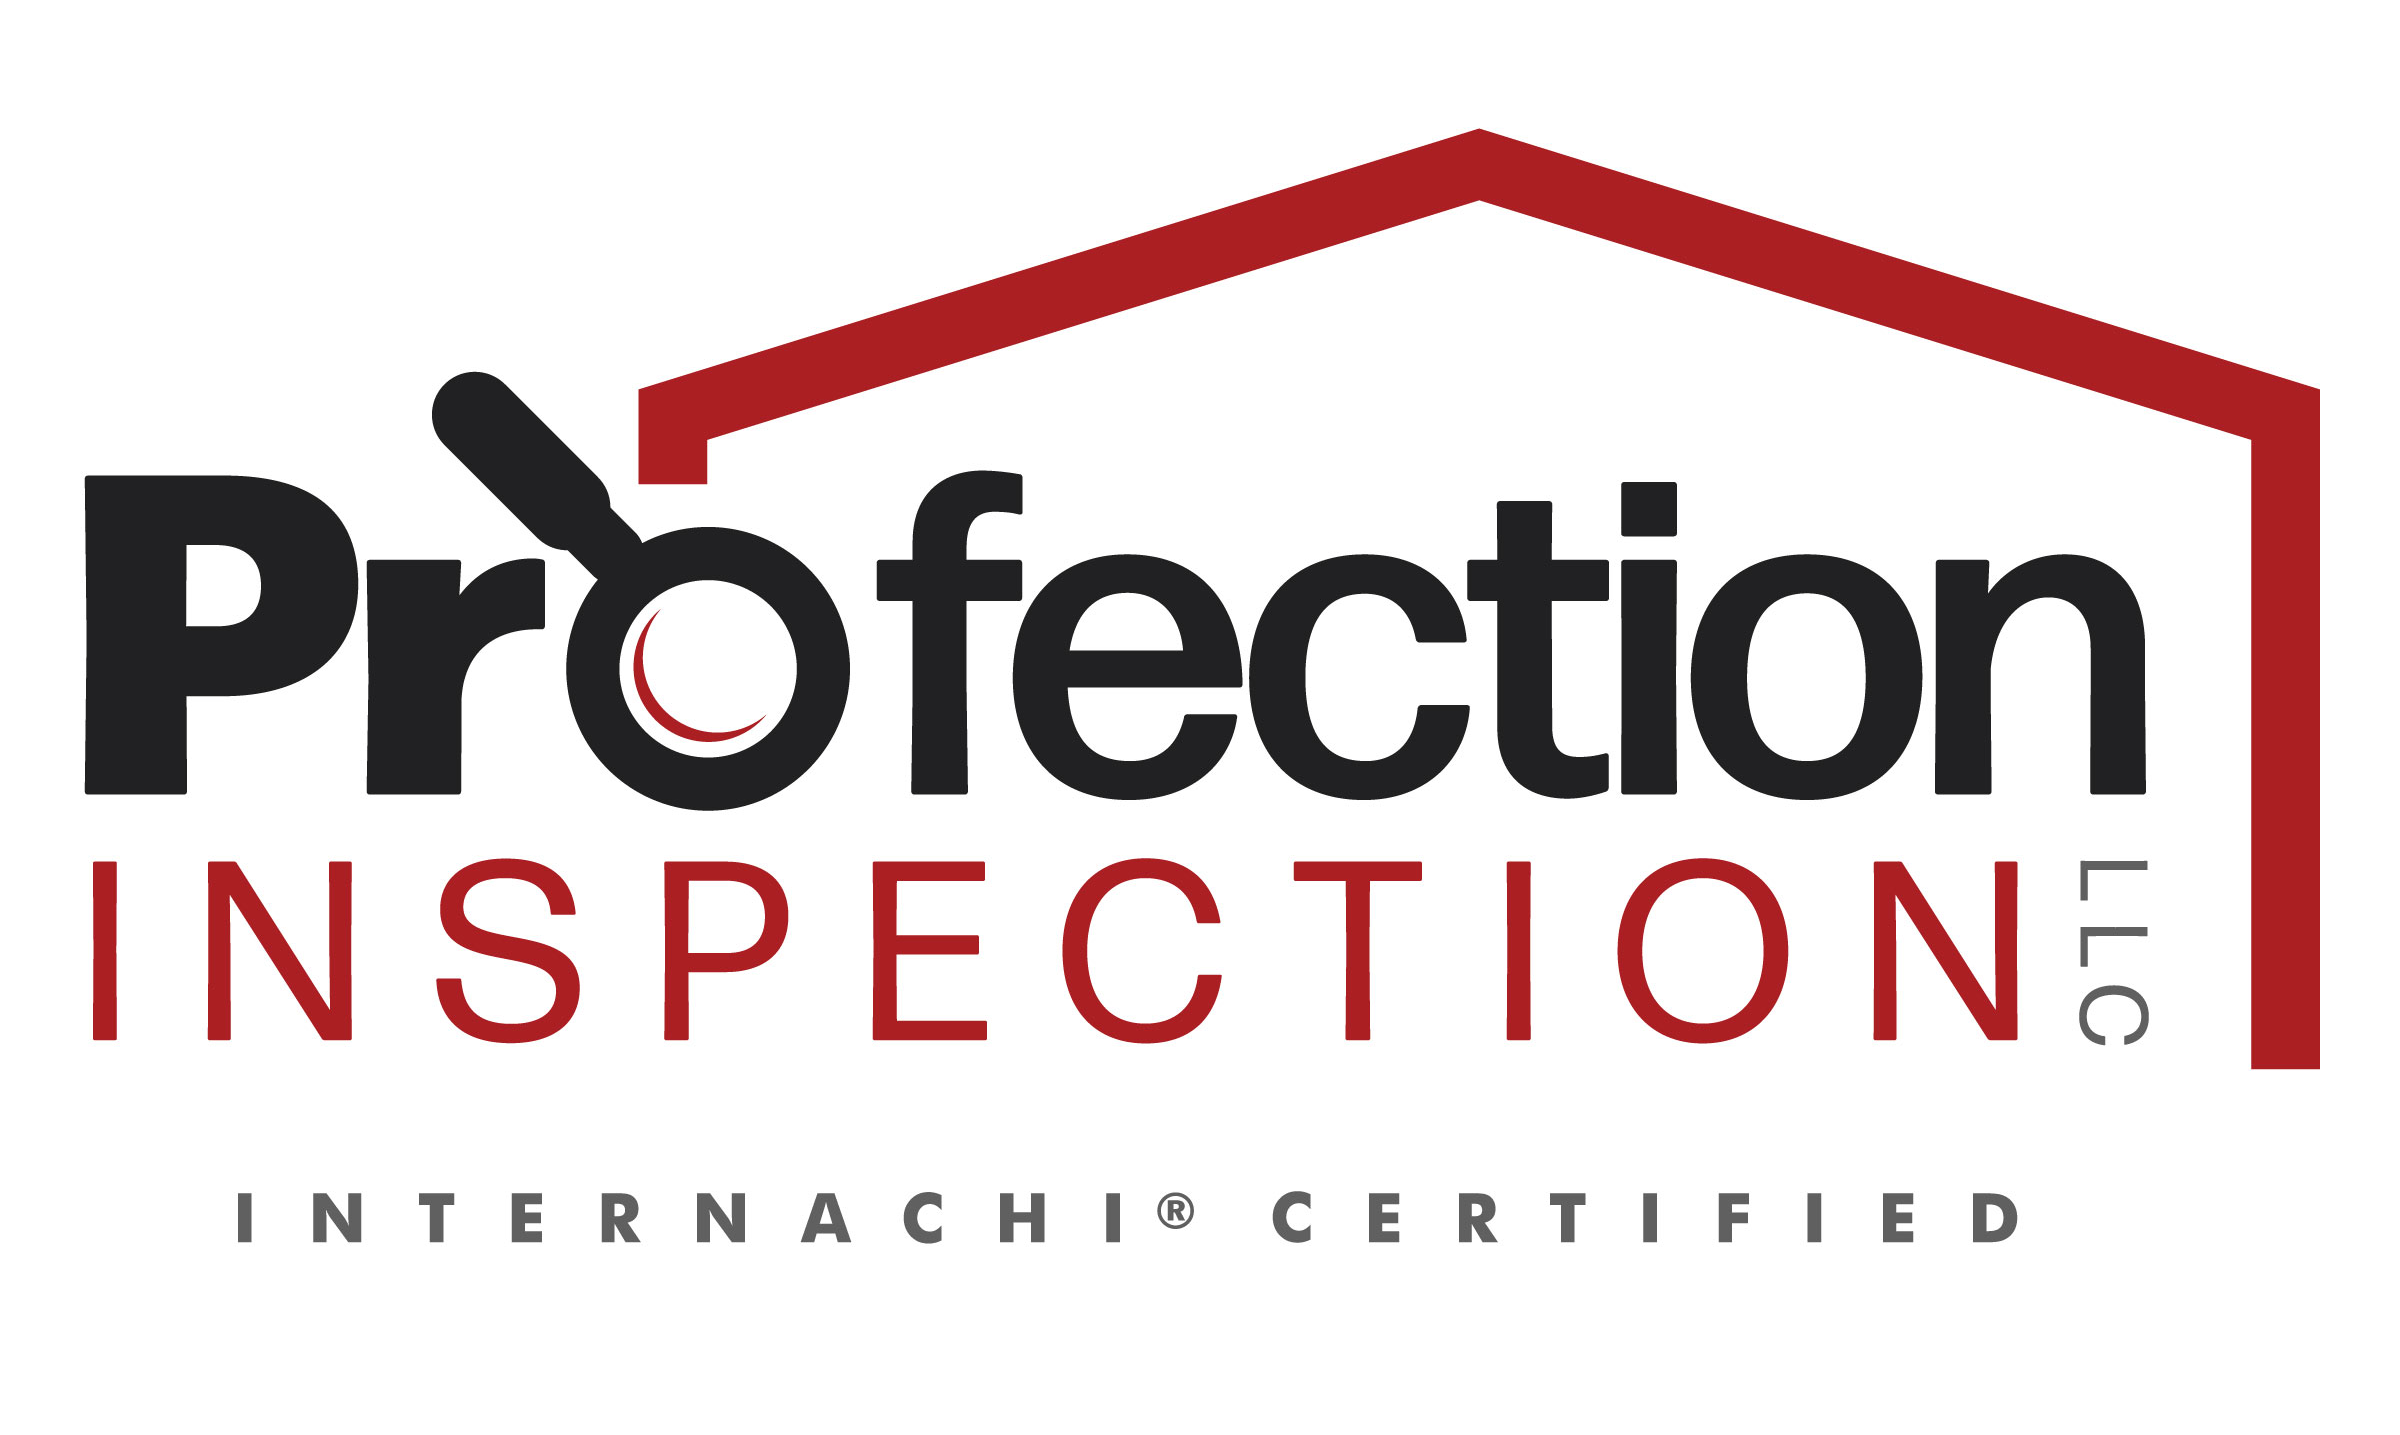 Profection Inspection